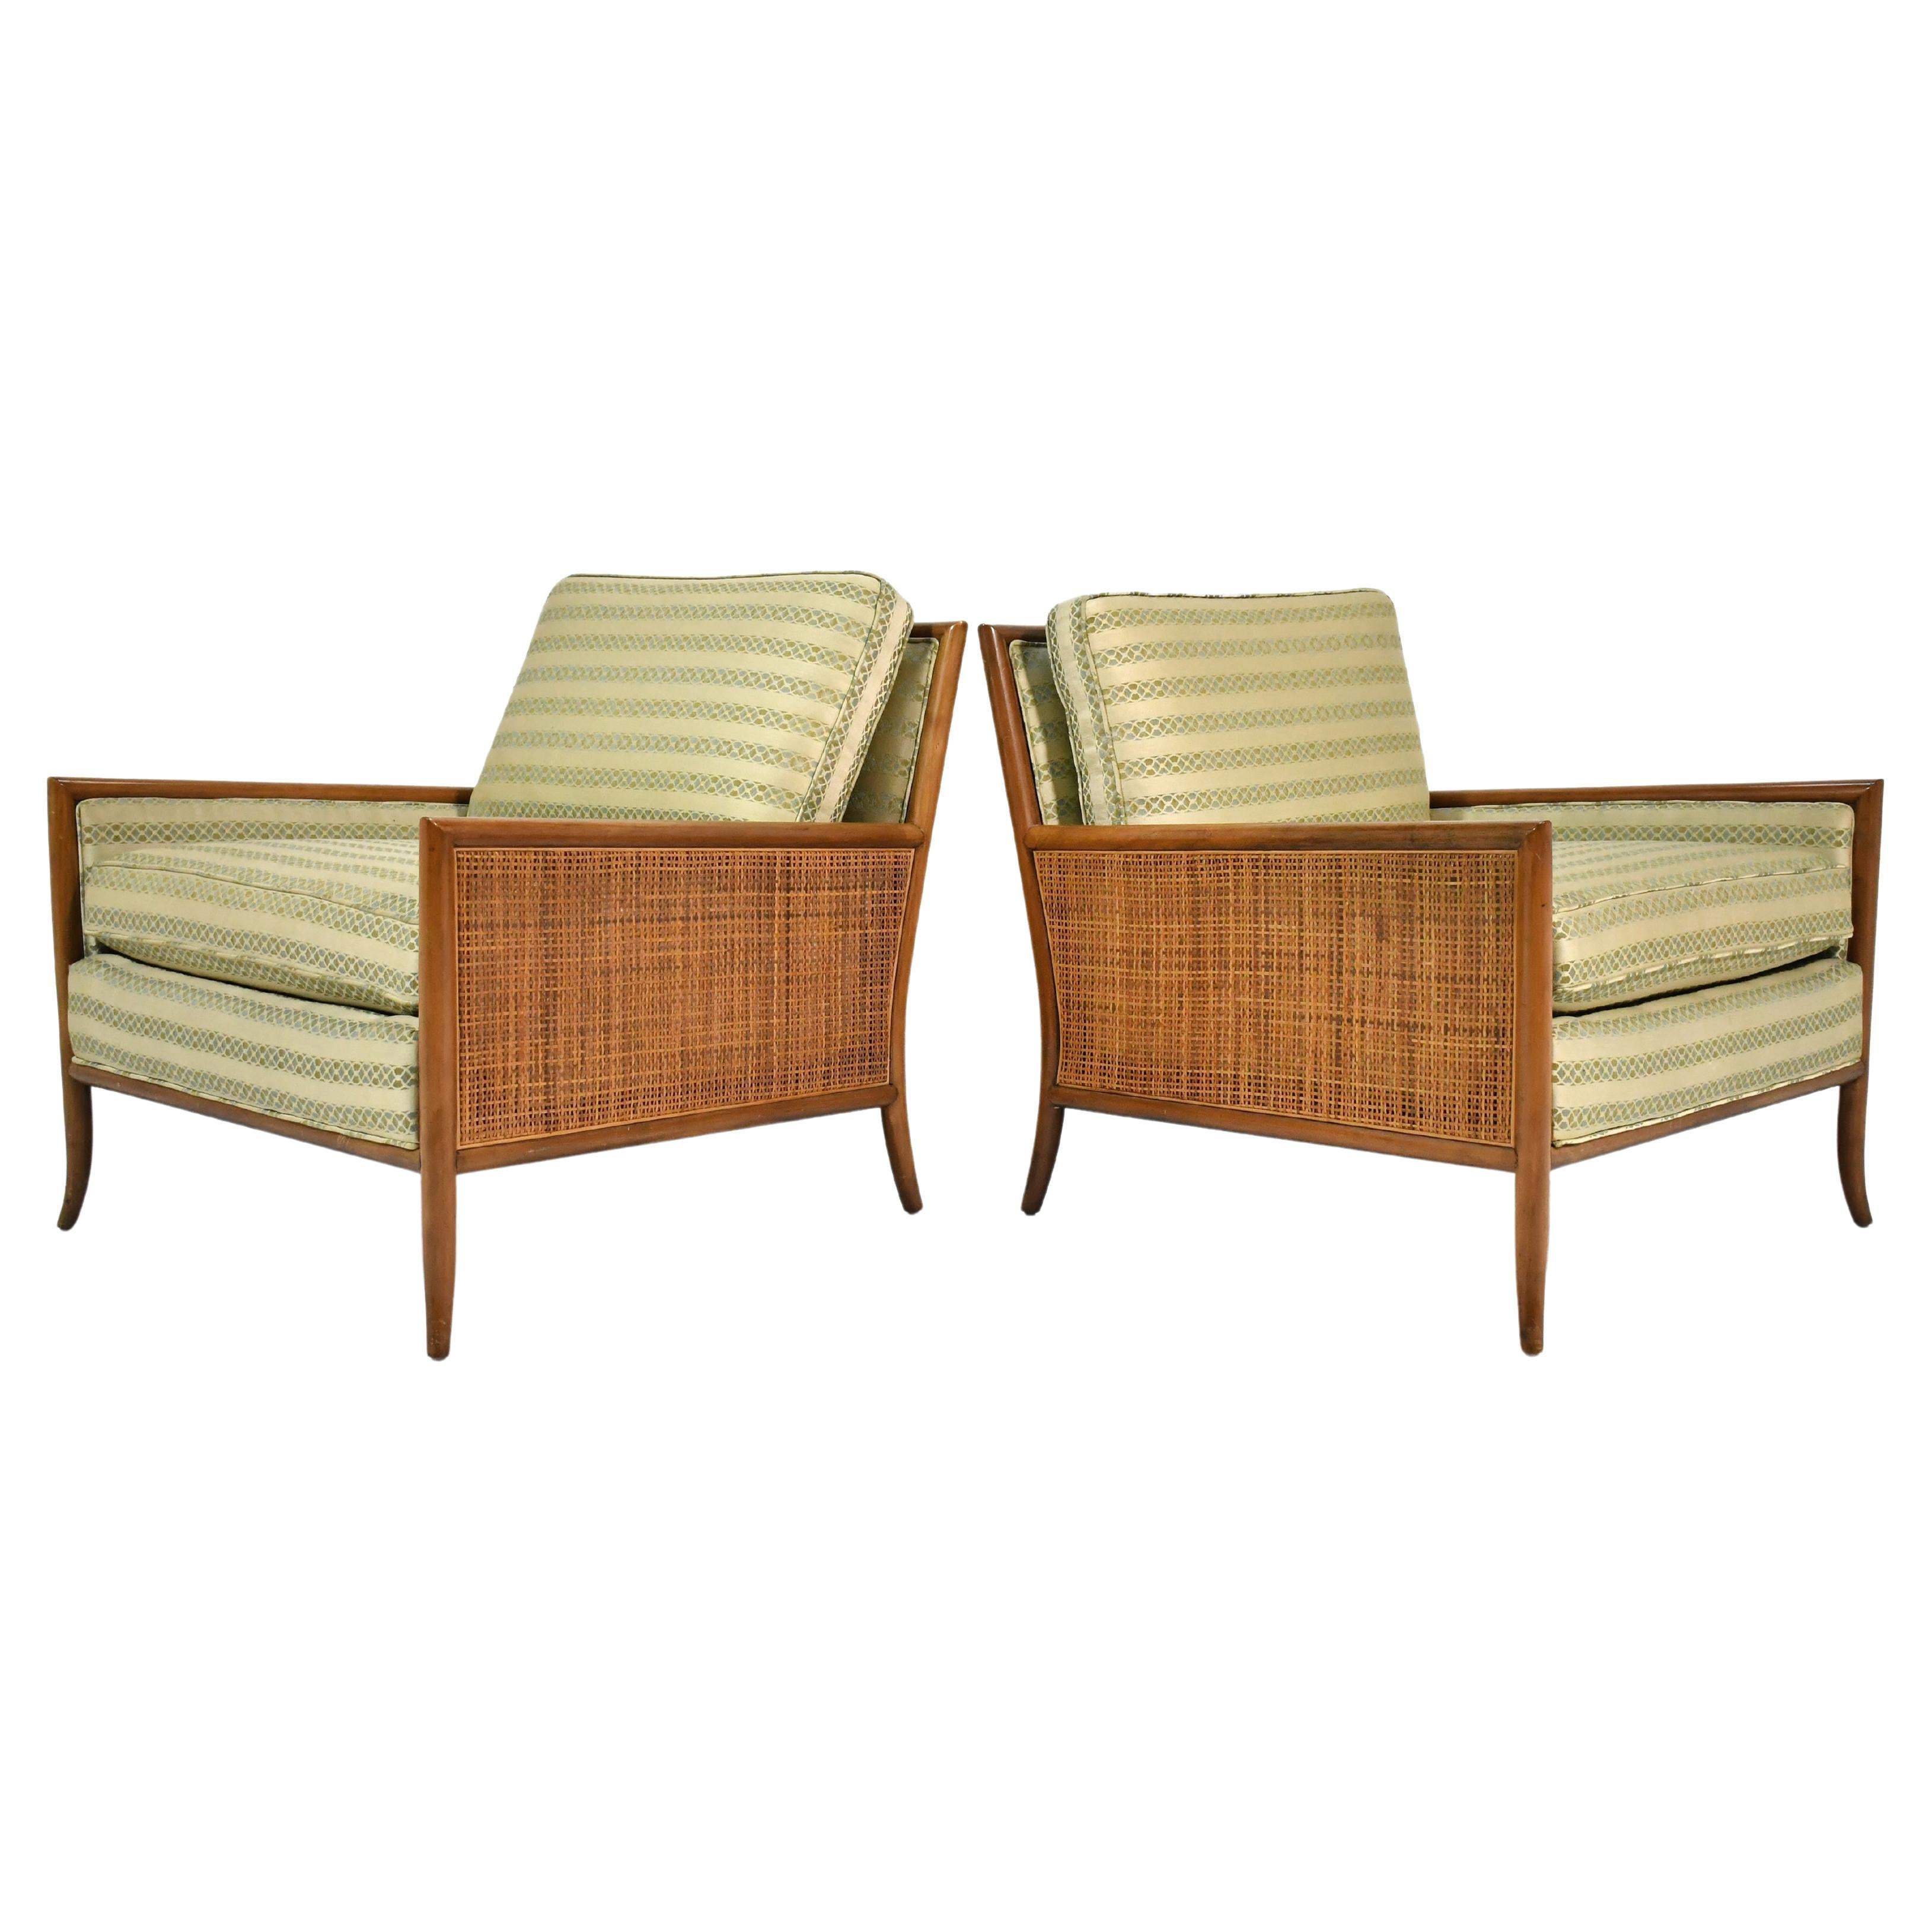 Pair of Lounge Chairs in the Manner of T.H. Robsjohn-Gibbings